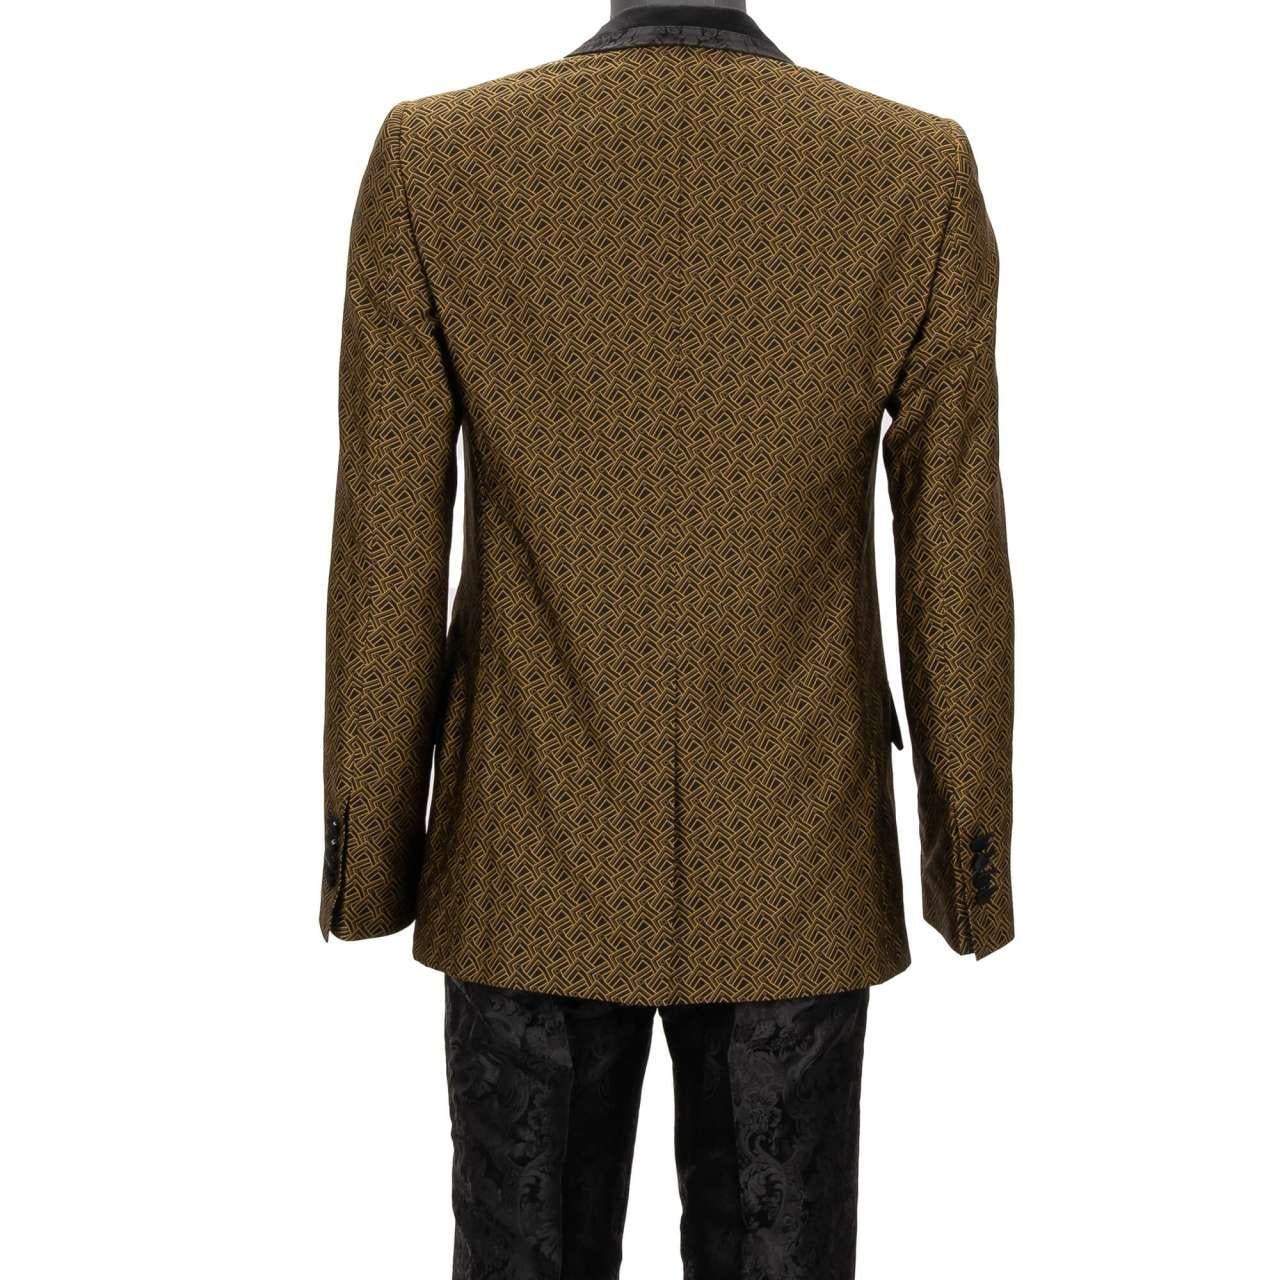 - Baroque jacquard double-breasted suit with geometric and floral pattern peak lapel in black and gold by DOLCE & GABBANA - SICILIA Model - RUNWAY - Dolce & Gabbana Fashion Show - New with tag - MADE in ITALY - Slim Fit - Model: GKH8MT-HJMFR-S8350 -